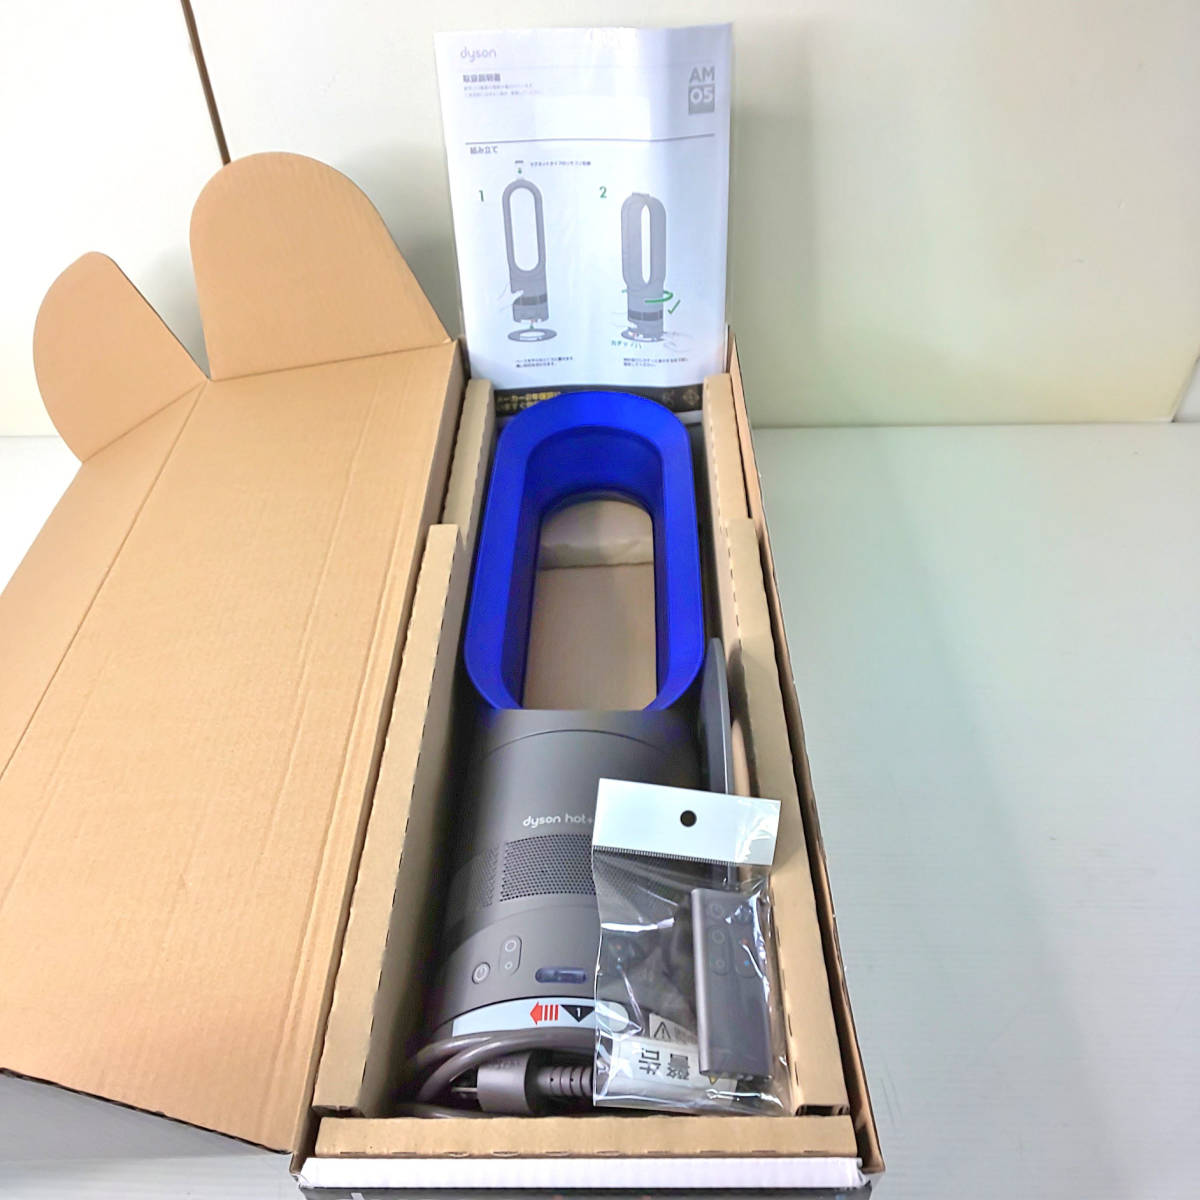  Dyson Dyson AM05 Hot + Cool Fan Heater cold manner temperature manner . remote control attaching operation goods box, manual attaching 